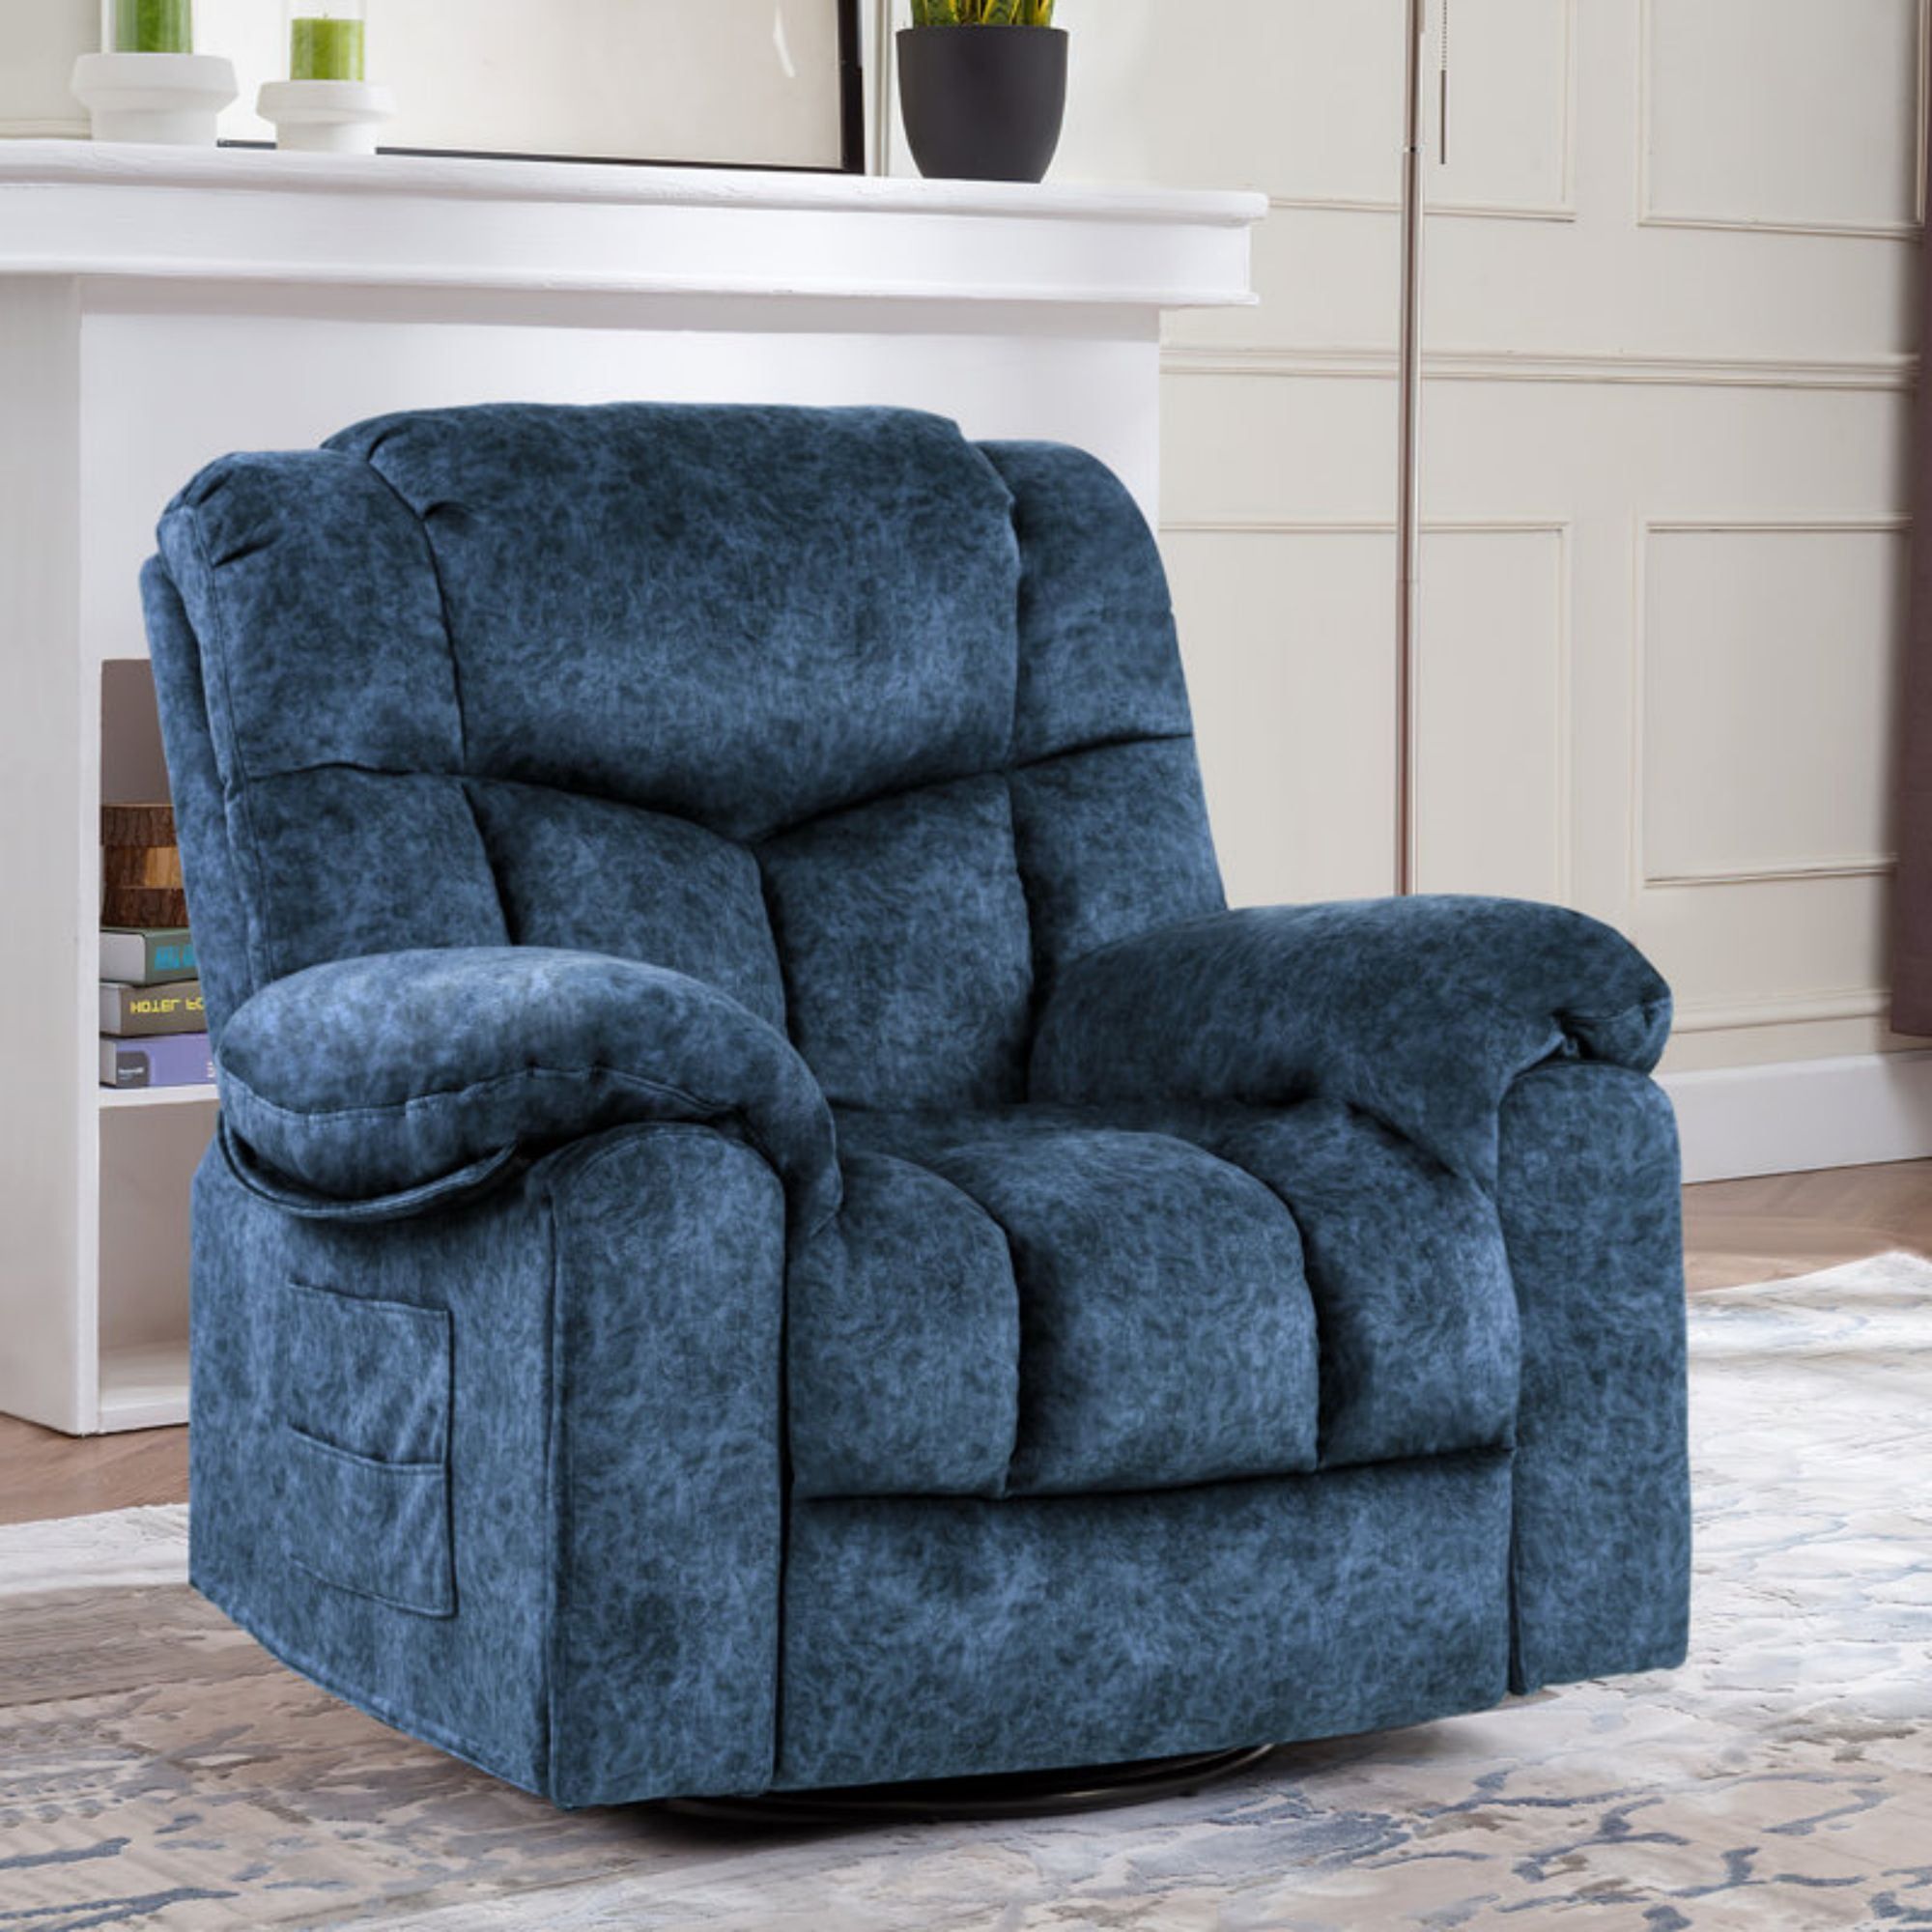 Homyedamic 35.43" Wide Modern Velvet Upholstered Heating & Massage Swivel  Reclining Rocker Chair With Hidden Cupholders For Living Room And Bedroom,  Blue – Walmart With Modern Velvet Upholstered Recliner Chairs (Photo 2 of 15)